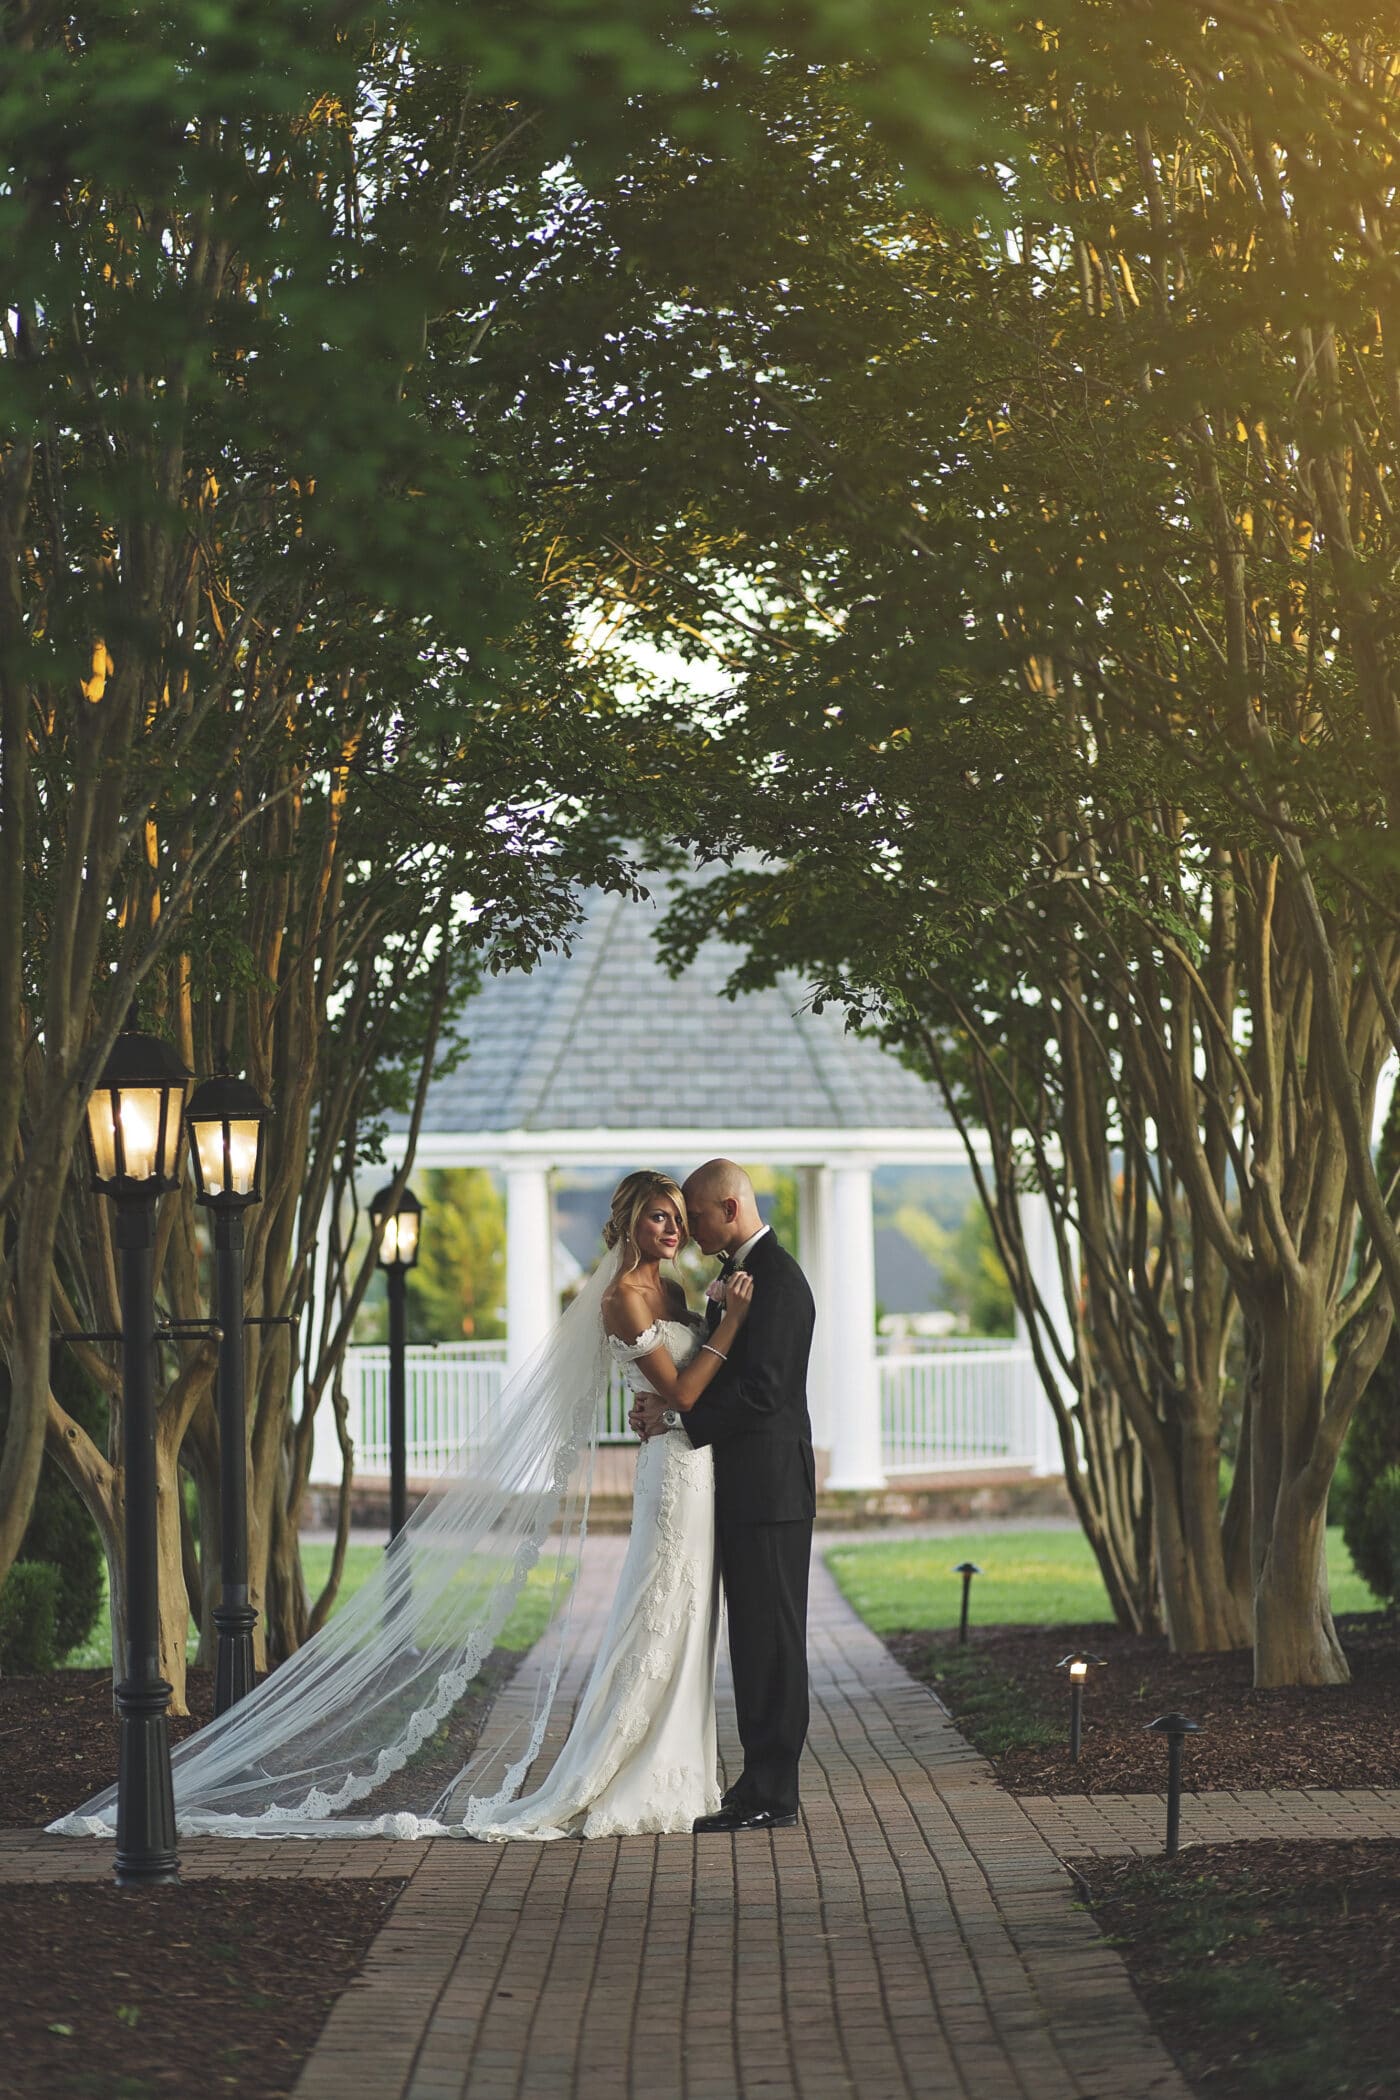 Selecting Your Virginia Wedding Venue | Entwined Events | Venue: West Manor Estate in Forest, VA | Photo Credit: Sherry Conrad Photography